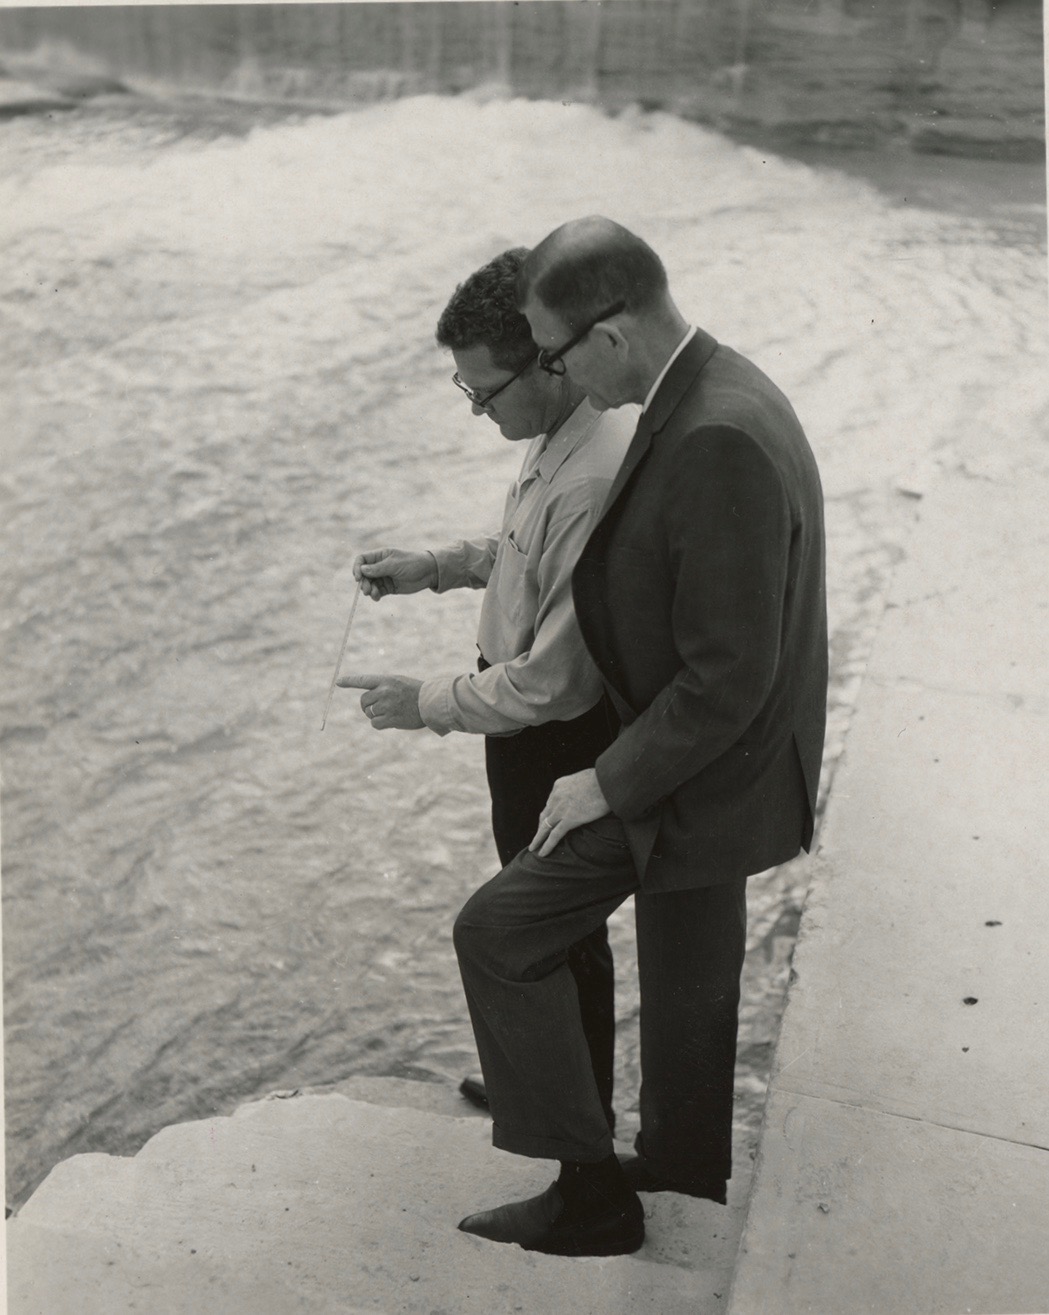 City Superintendent of Parks Jack Robinson & Parks Director Beverly Sheffield at Barton Springs Pool (from left) (Austin History Center, Austin Public Library, 37739)